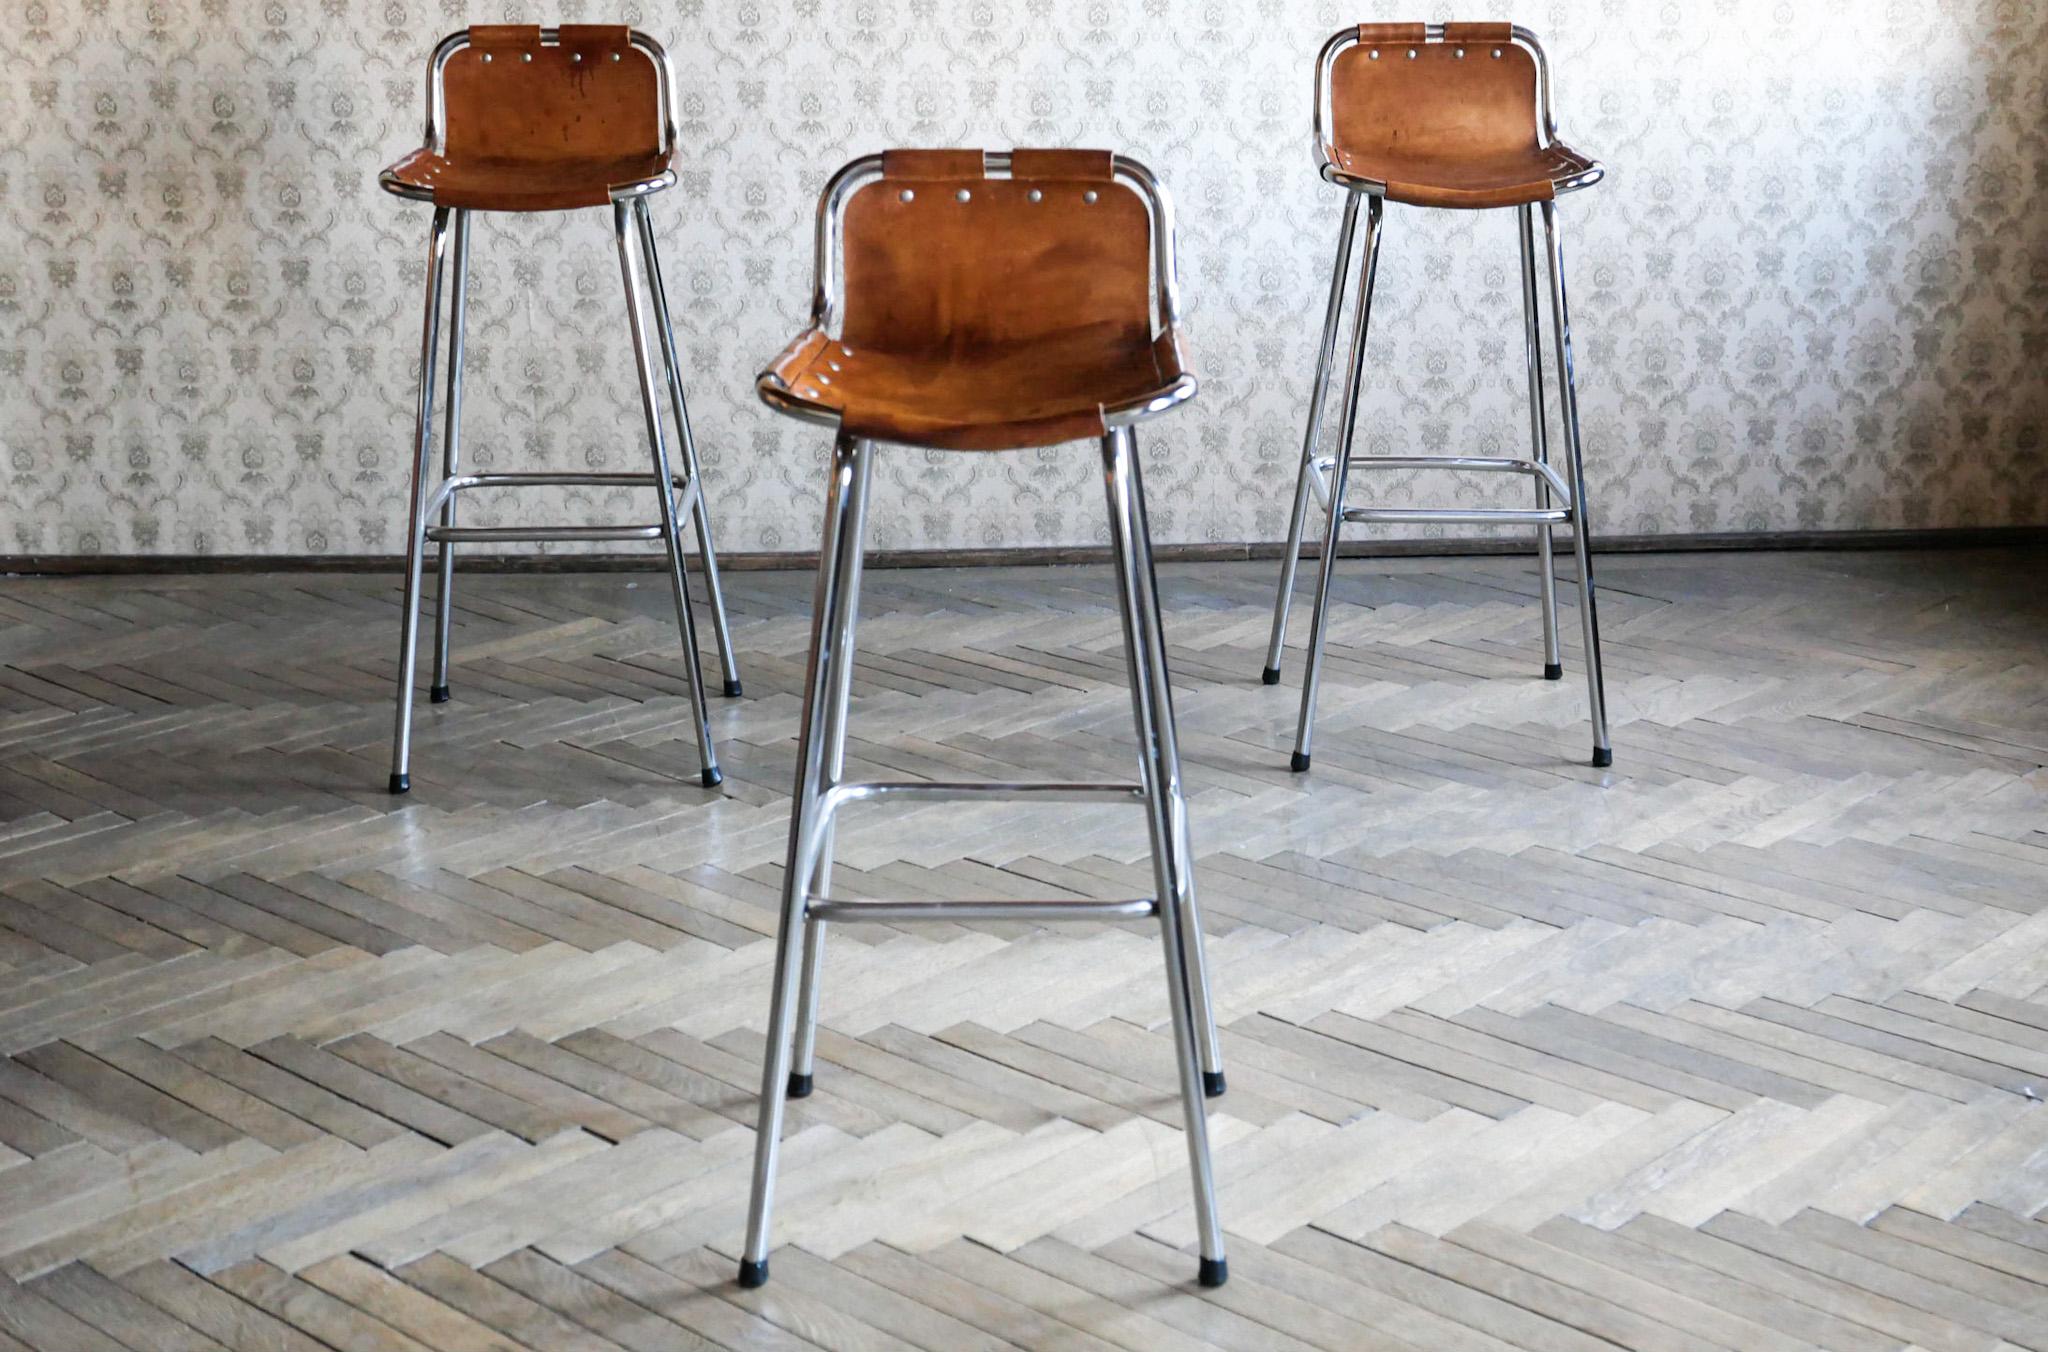 French Mid-Century Modern Brown Saddle Leather Bar Stools, Ch. Perriand, France, 1960s